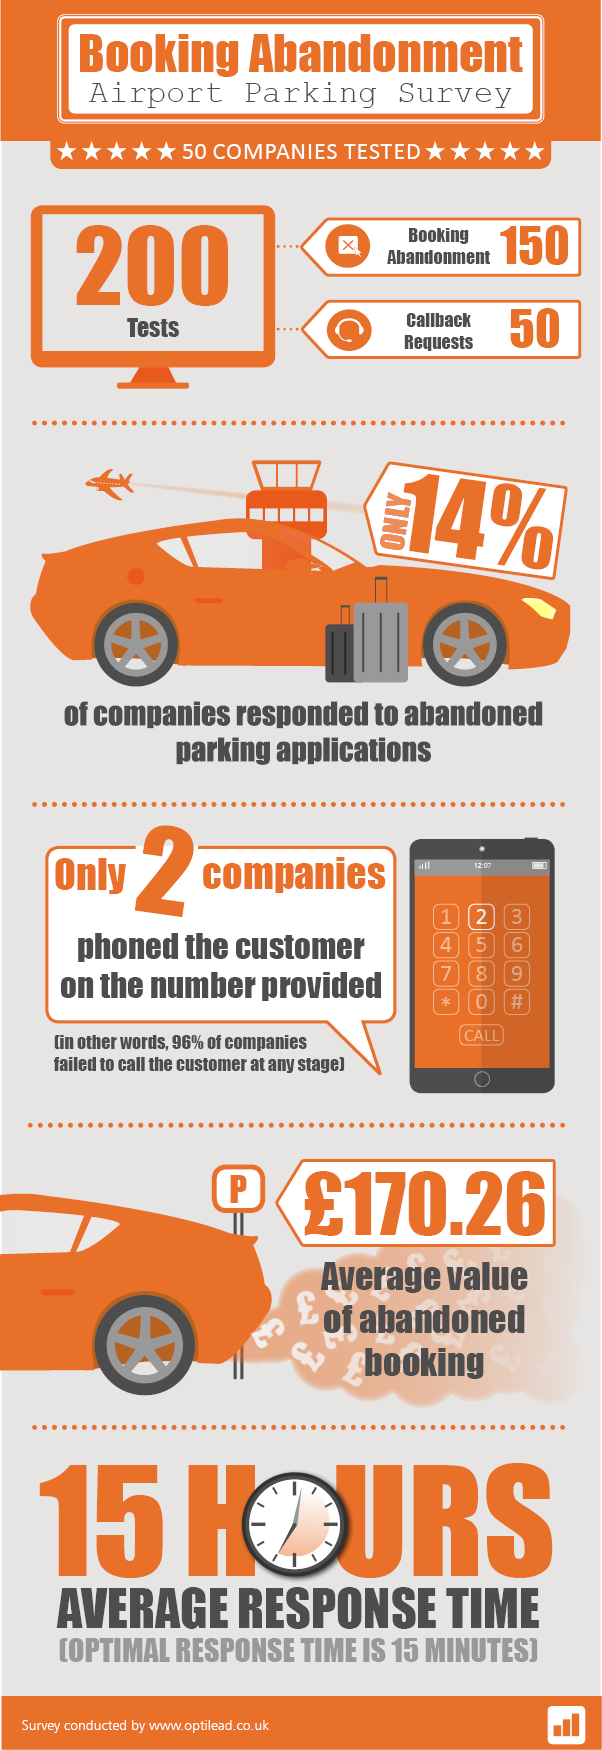 Booking abandonment in airport parking: infographic